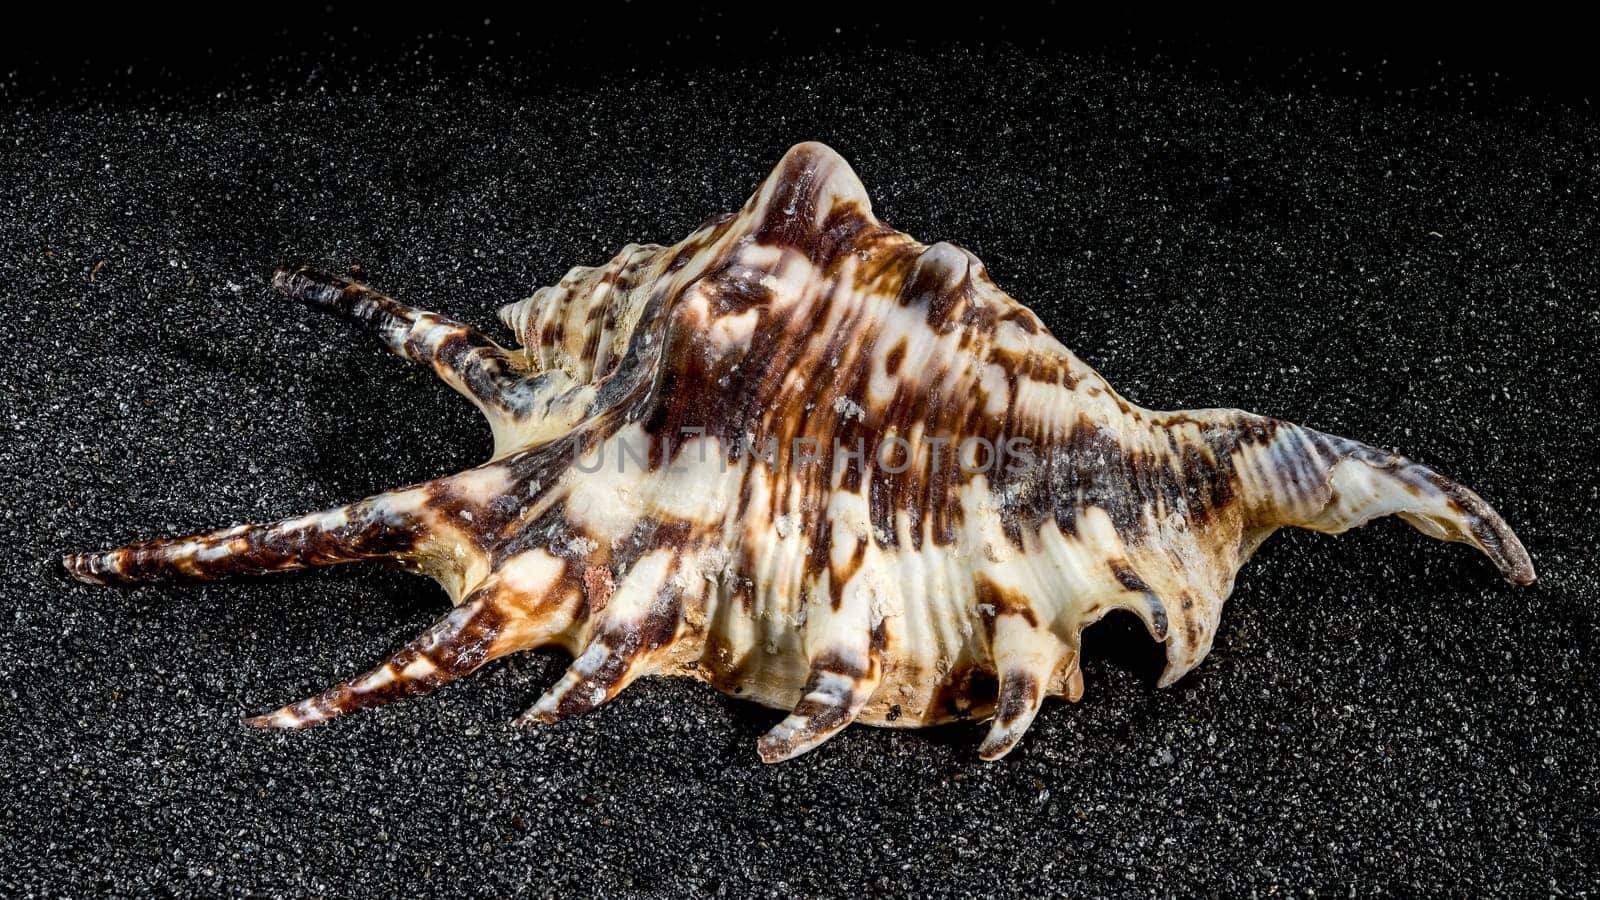 Spider conch shell on a black sand background by Multipedia